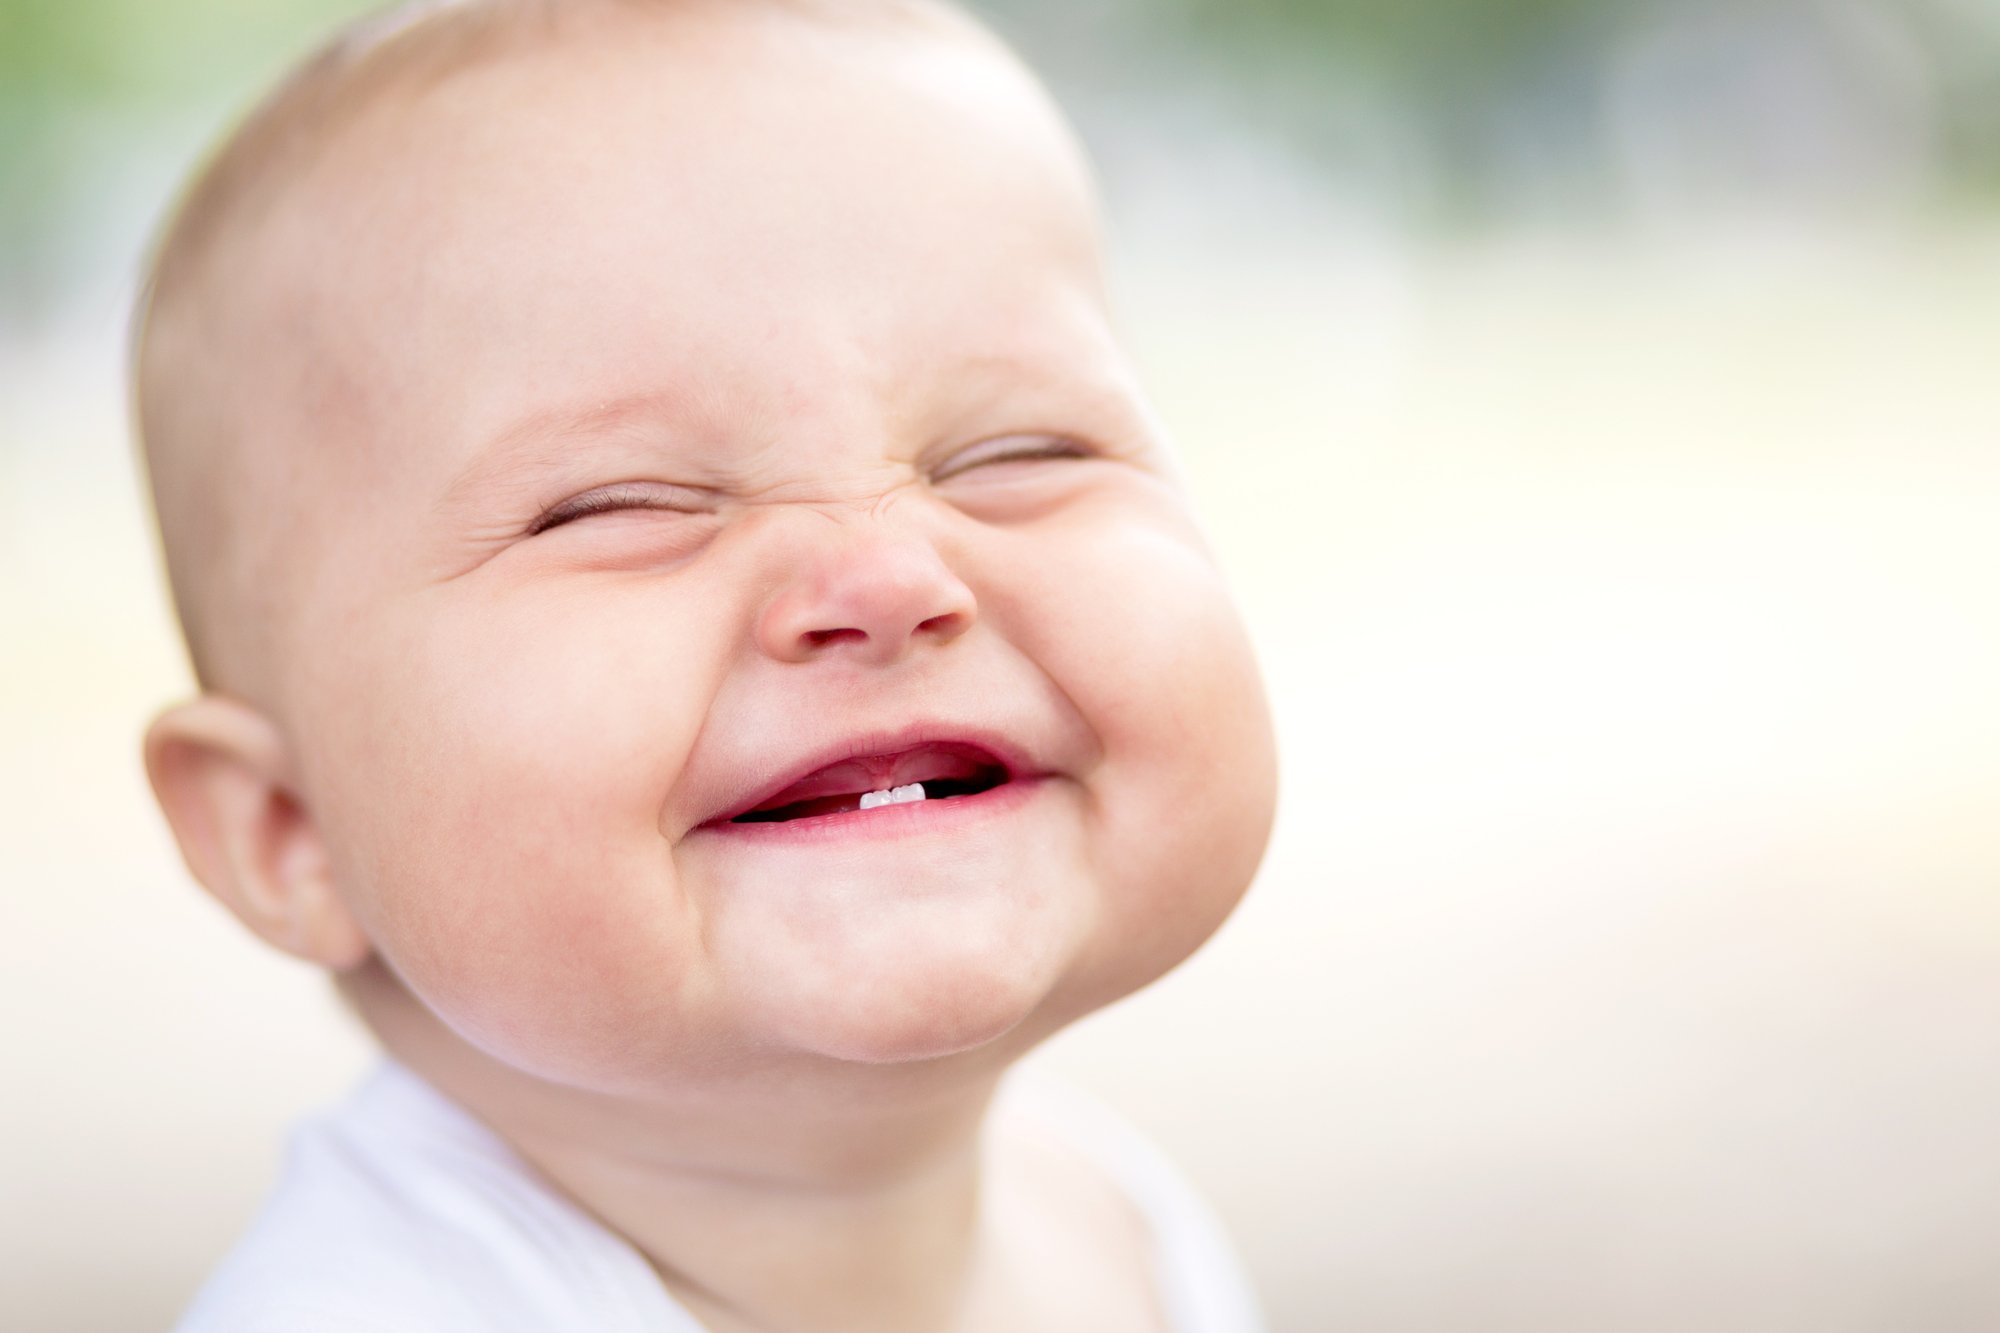 smiling baby with two baby teeth